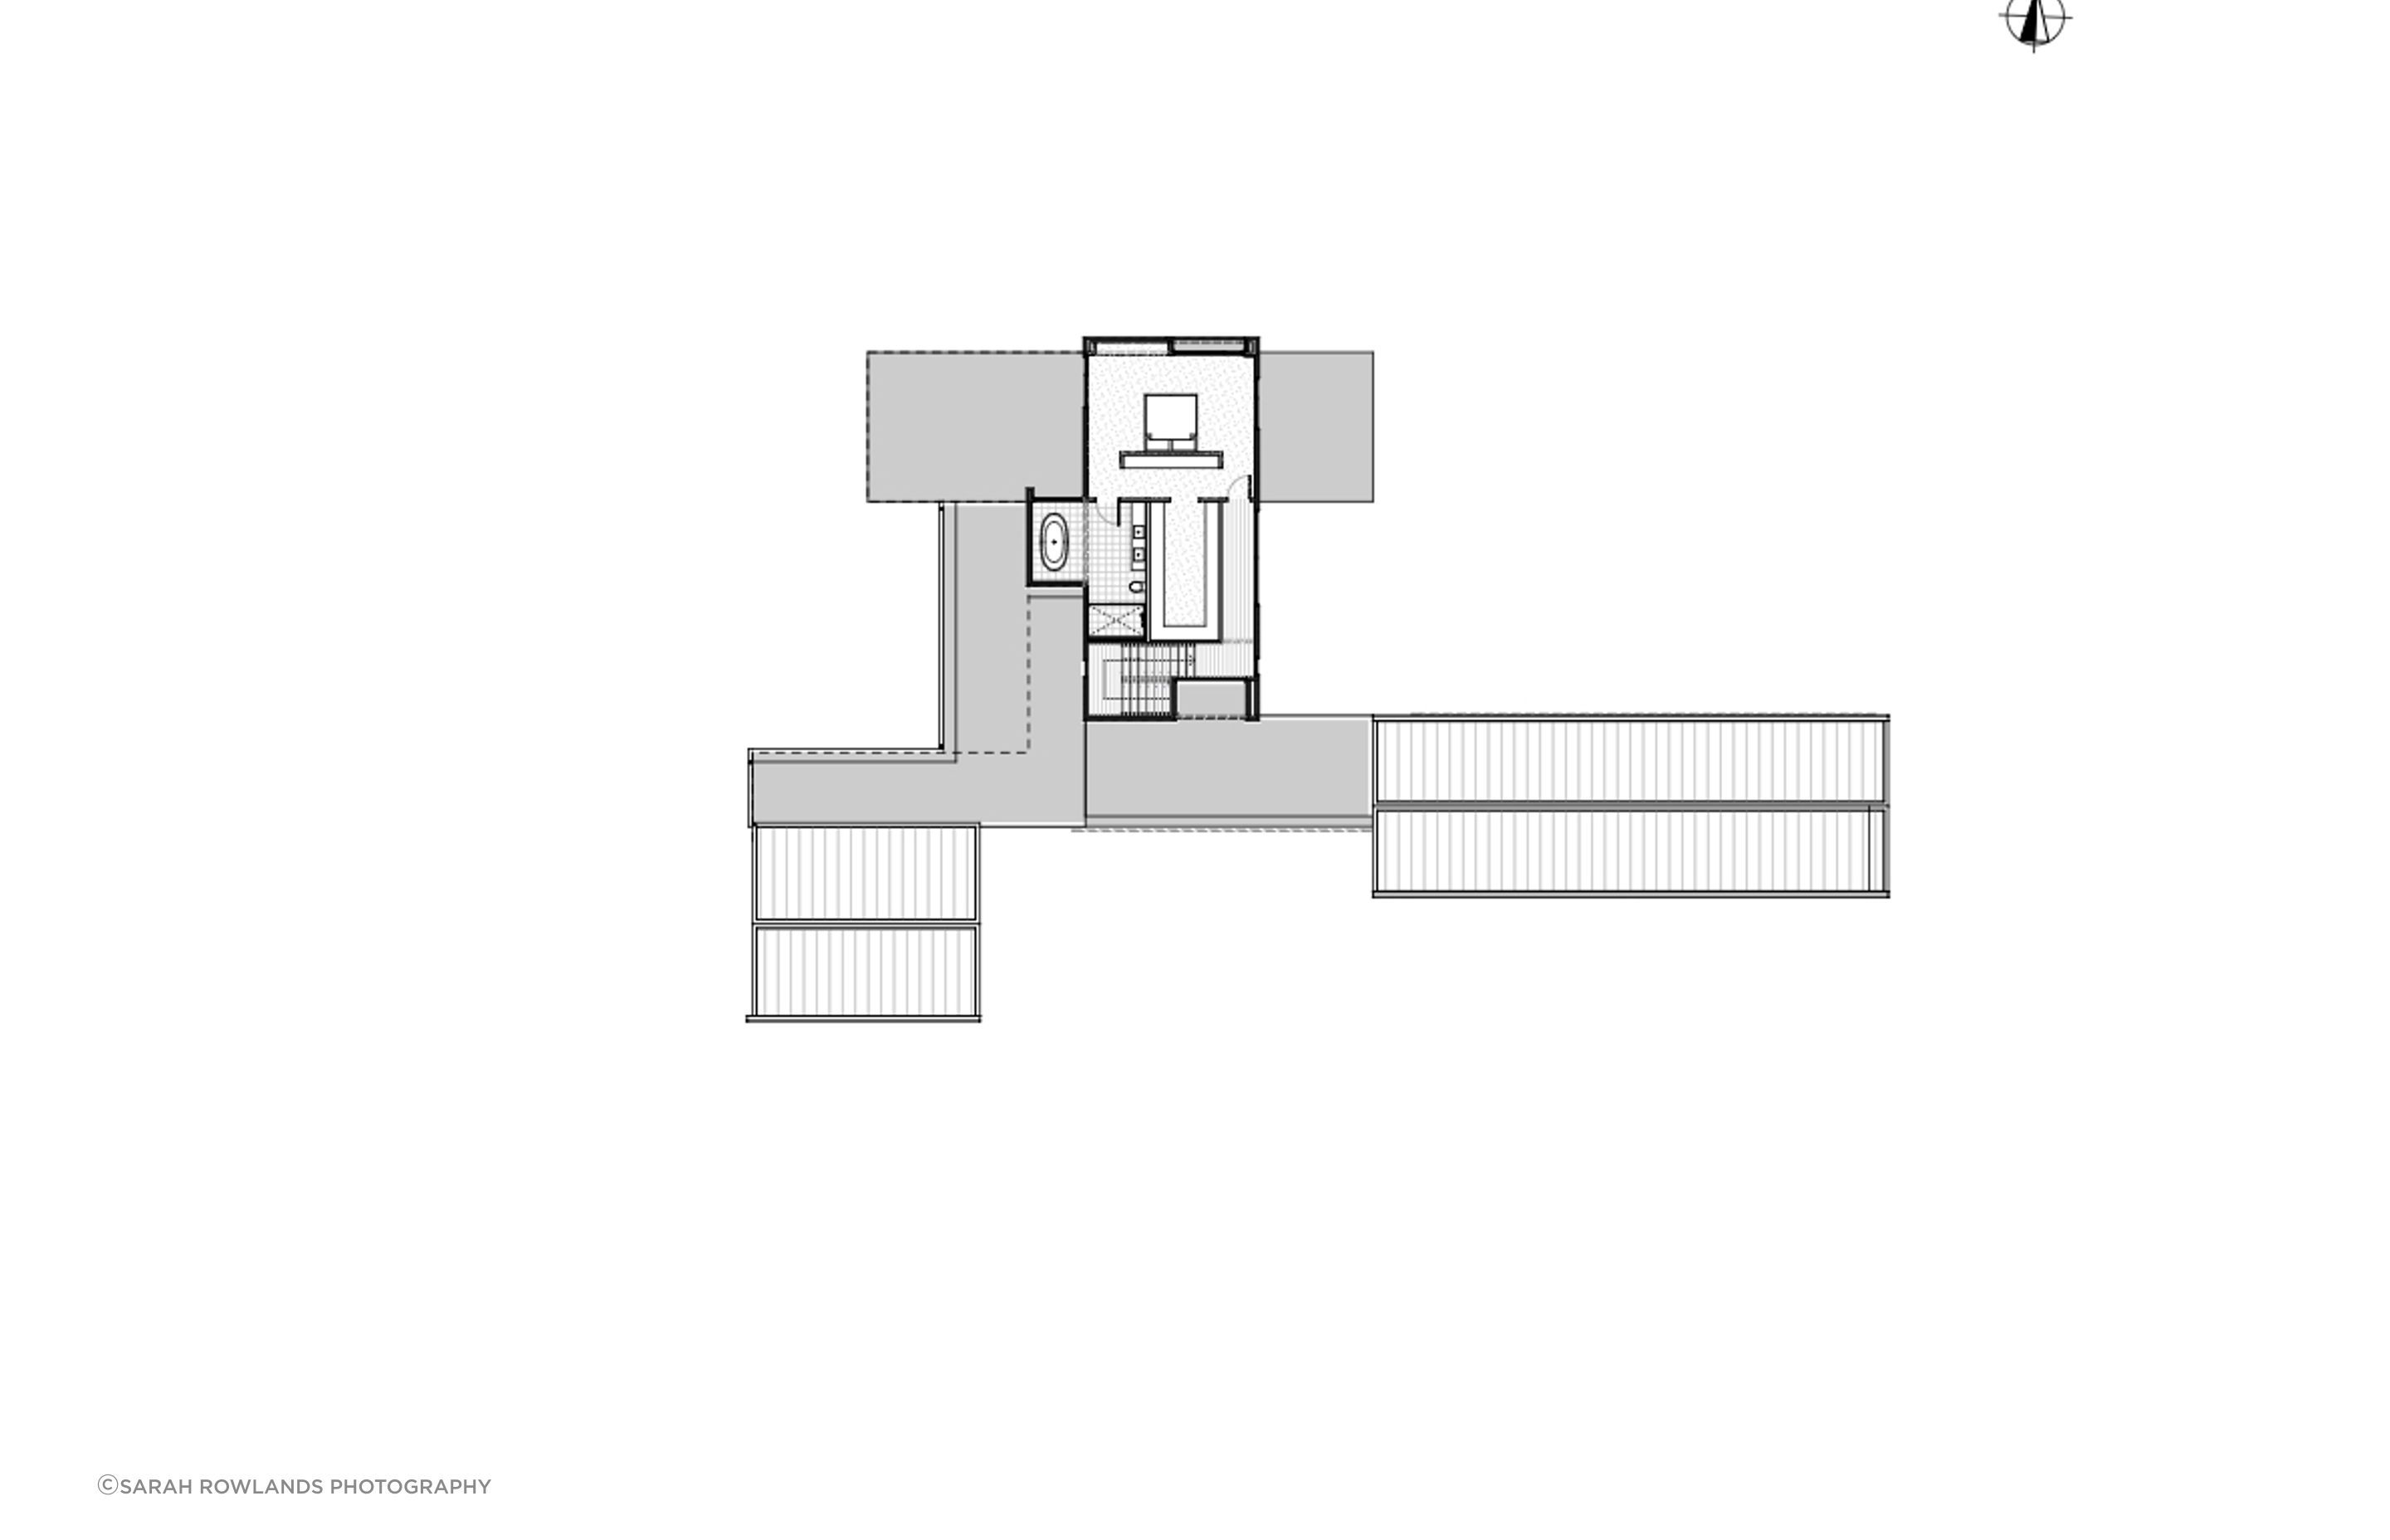 First-floor plan by Arthouse Architects.